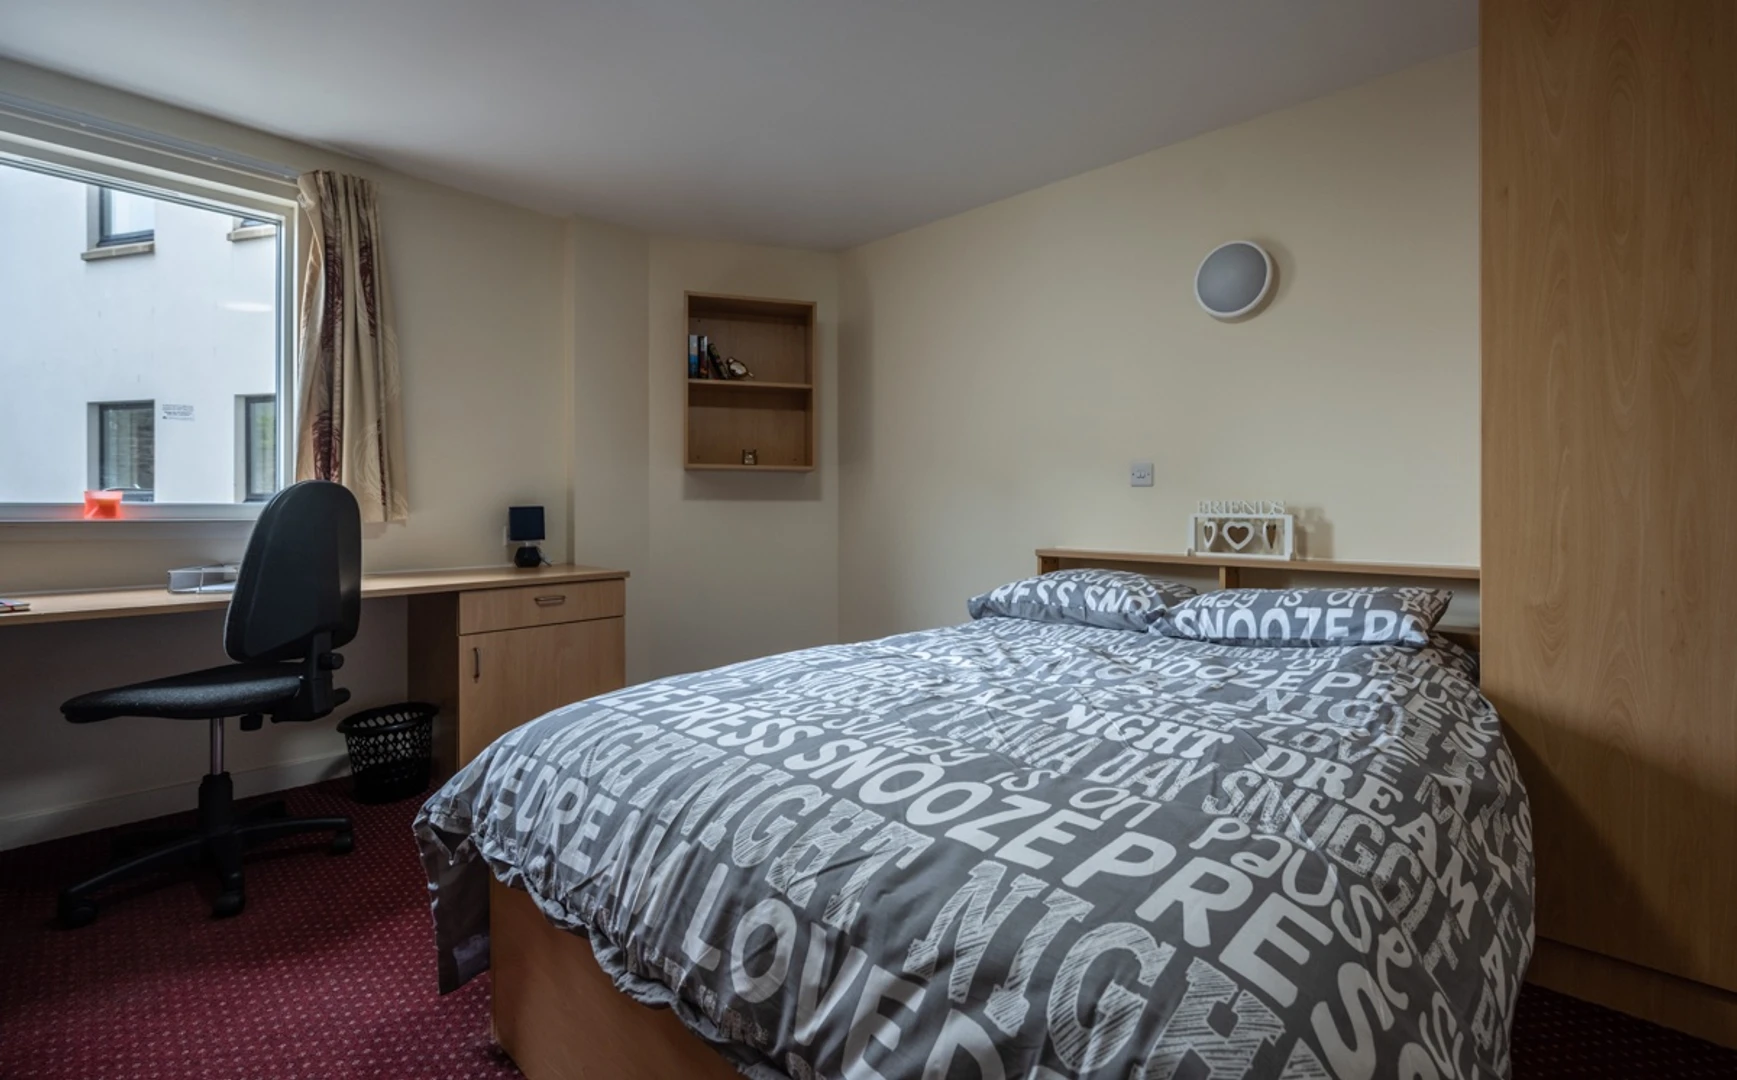 Cheap private room in Dundee